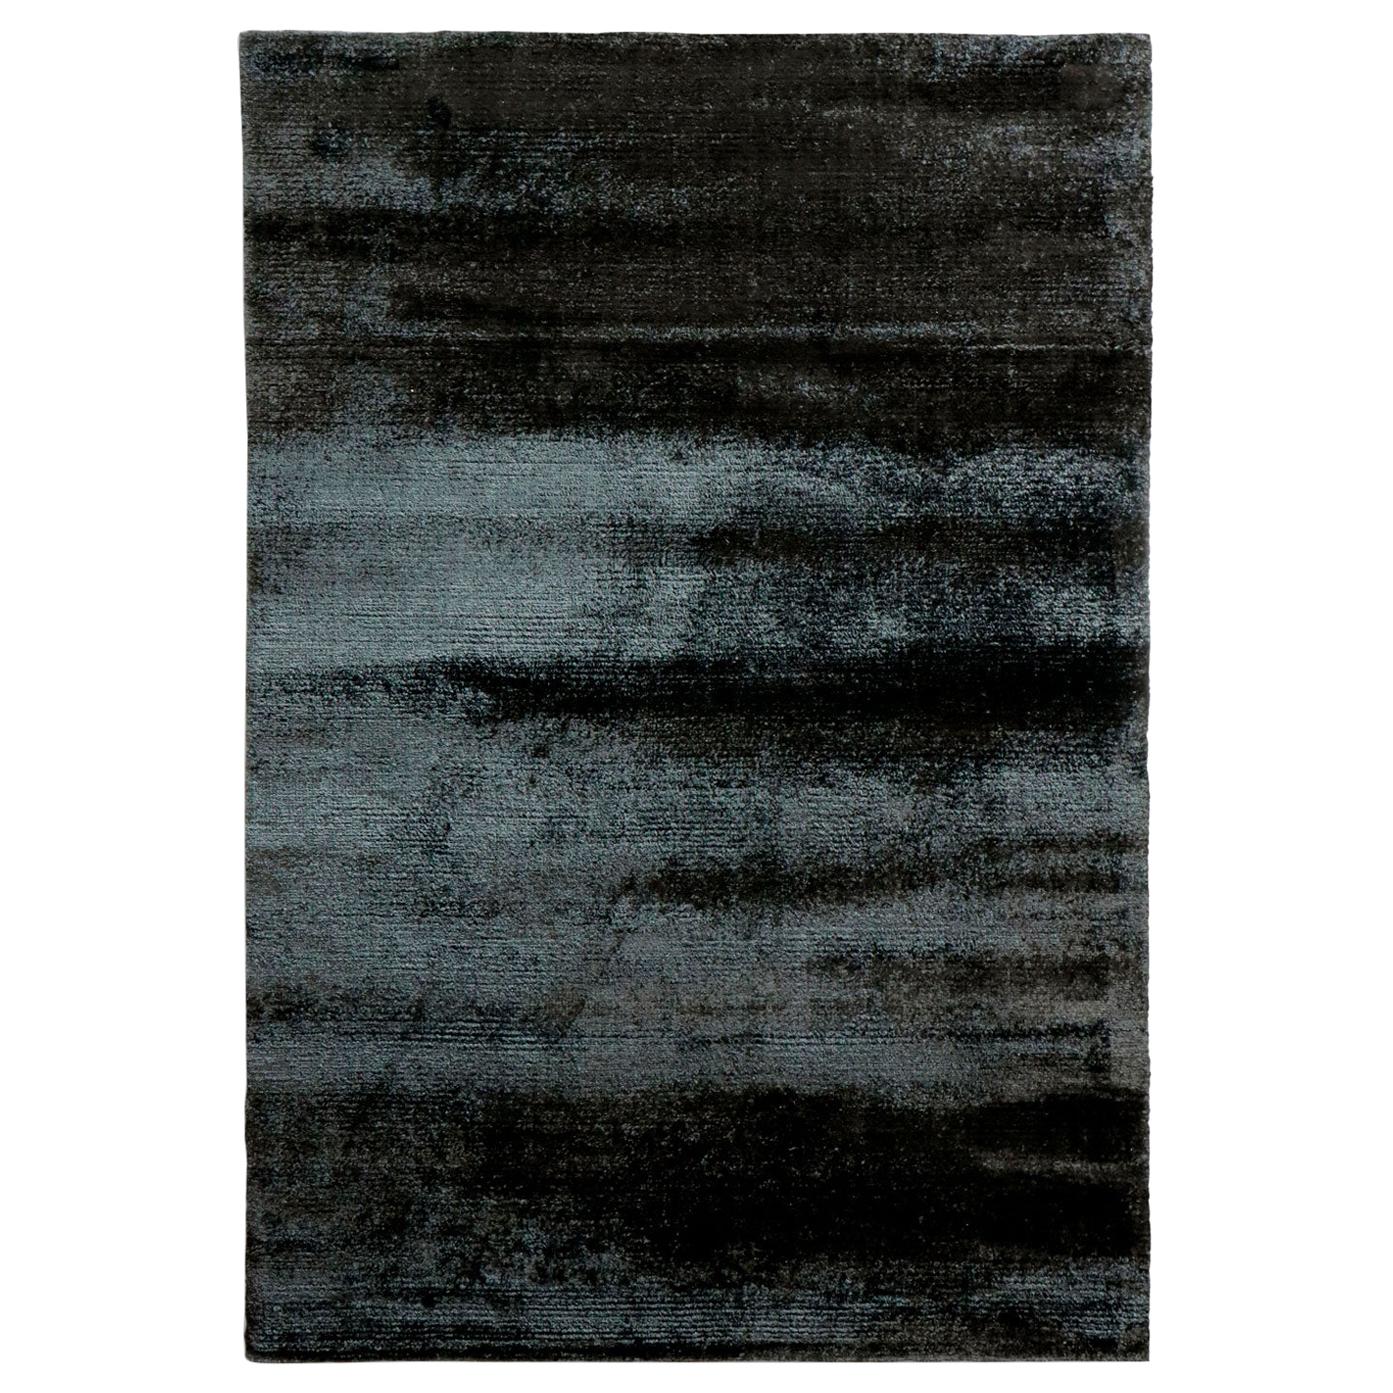 Contemporary Shiny Black Viscose Rug by Deanna Comelllini In Stock 200x300 cm For Sale